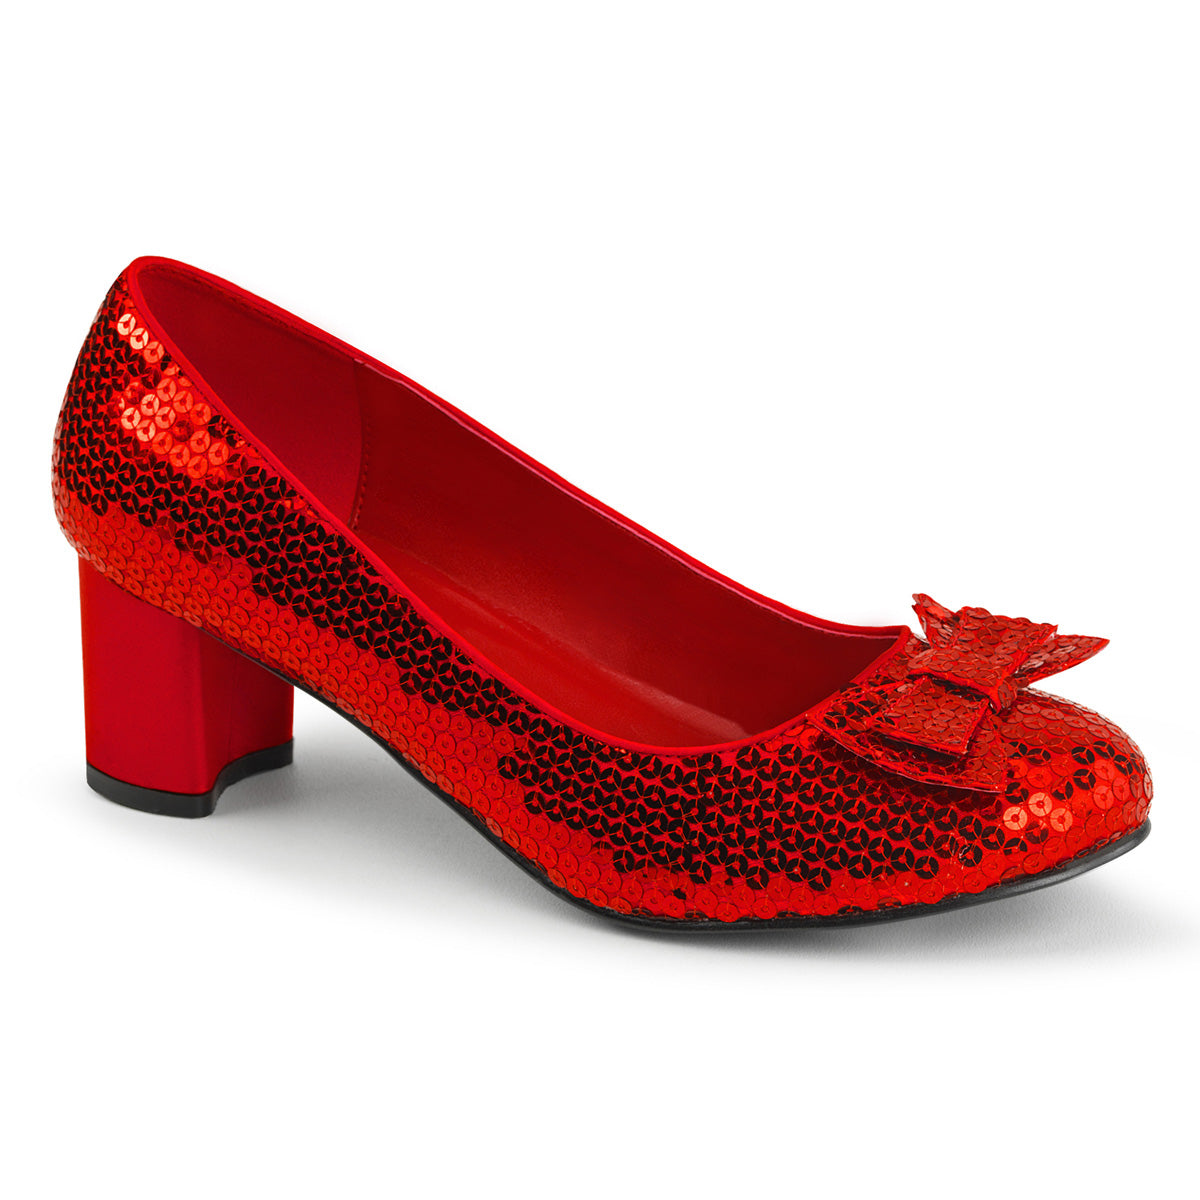 DOROTHY-01 2" Heel Red Sequins Women's Costume Shoes Funtasma Costume Shoes